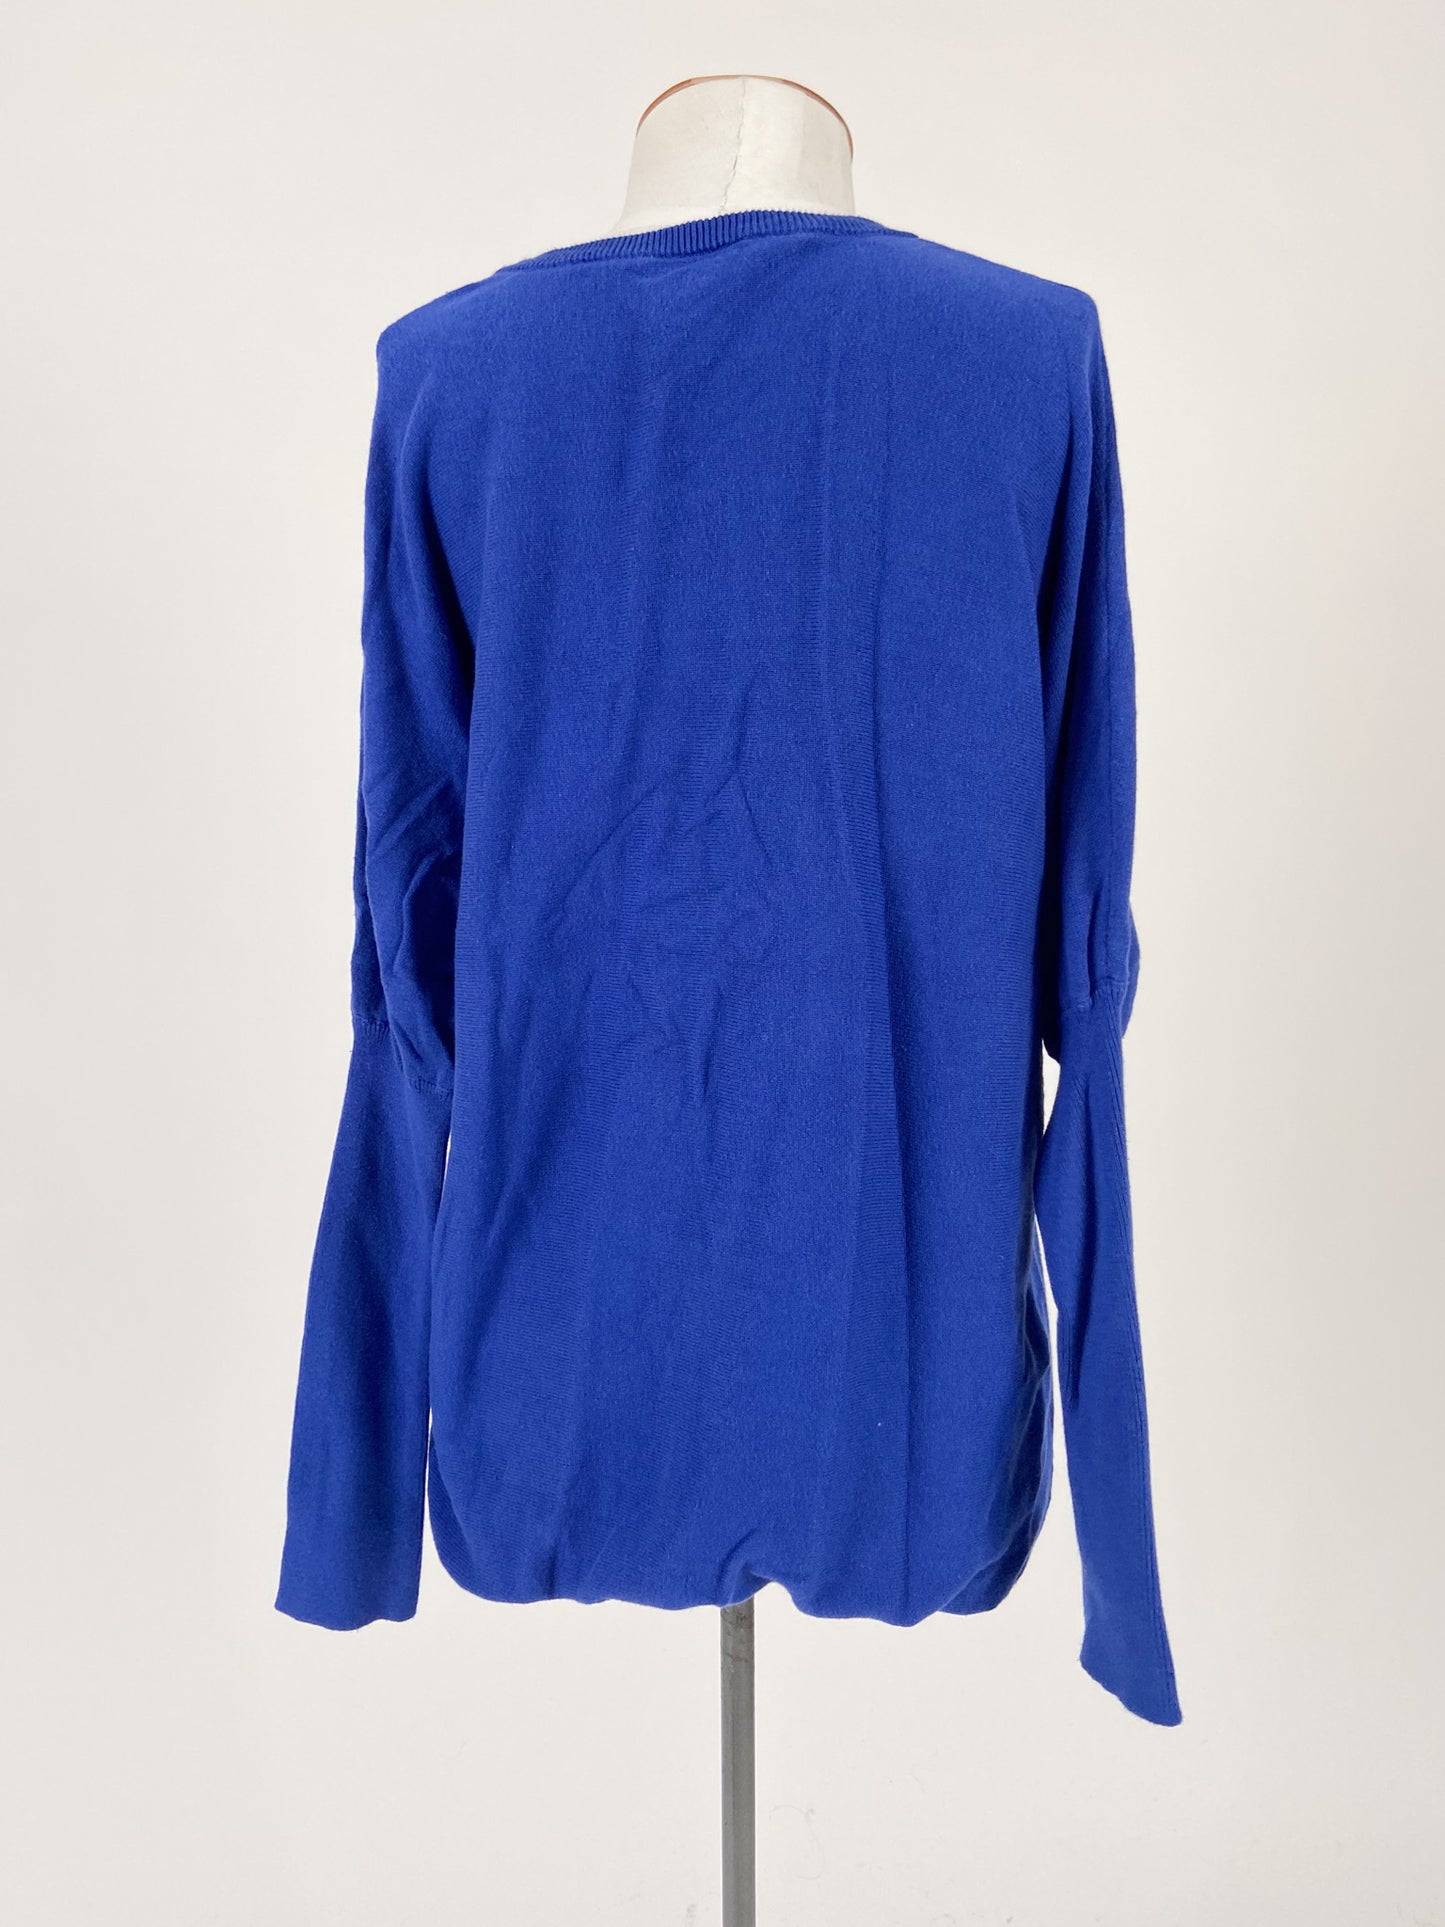 Home-Lee | Blue Casual/Workwear Top | Size 6